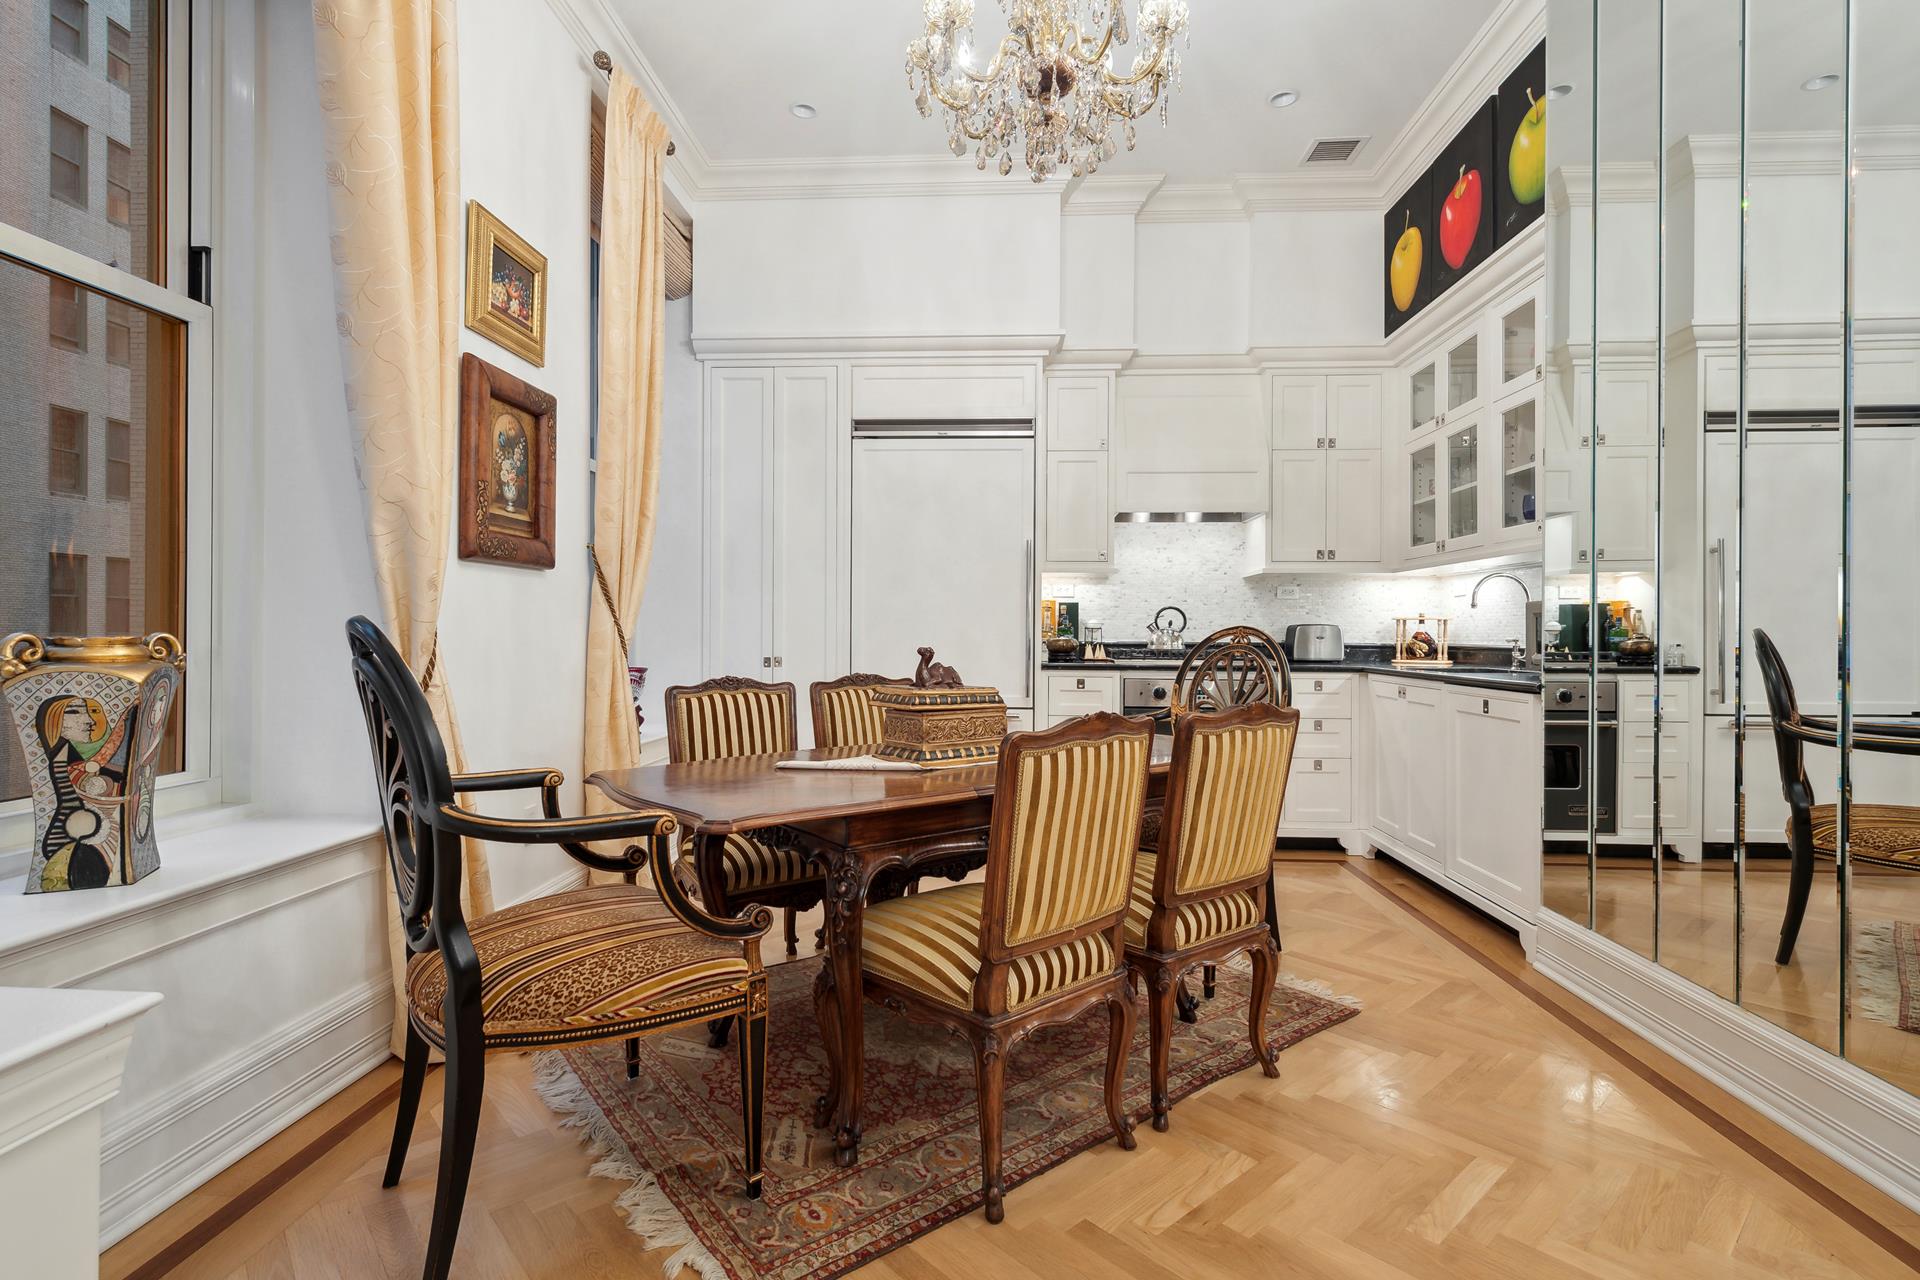 1 Central Park 908, Central Park South, Midtown West, NYC - 1 Bedrooms  
1 Bathrooms  
3 Rooms - 